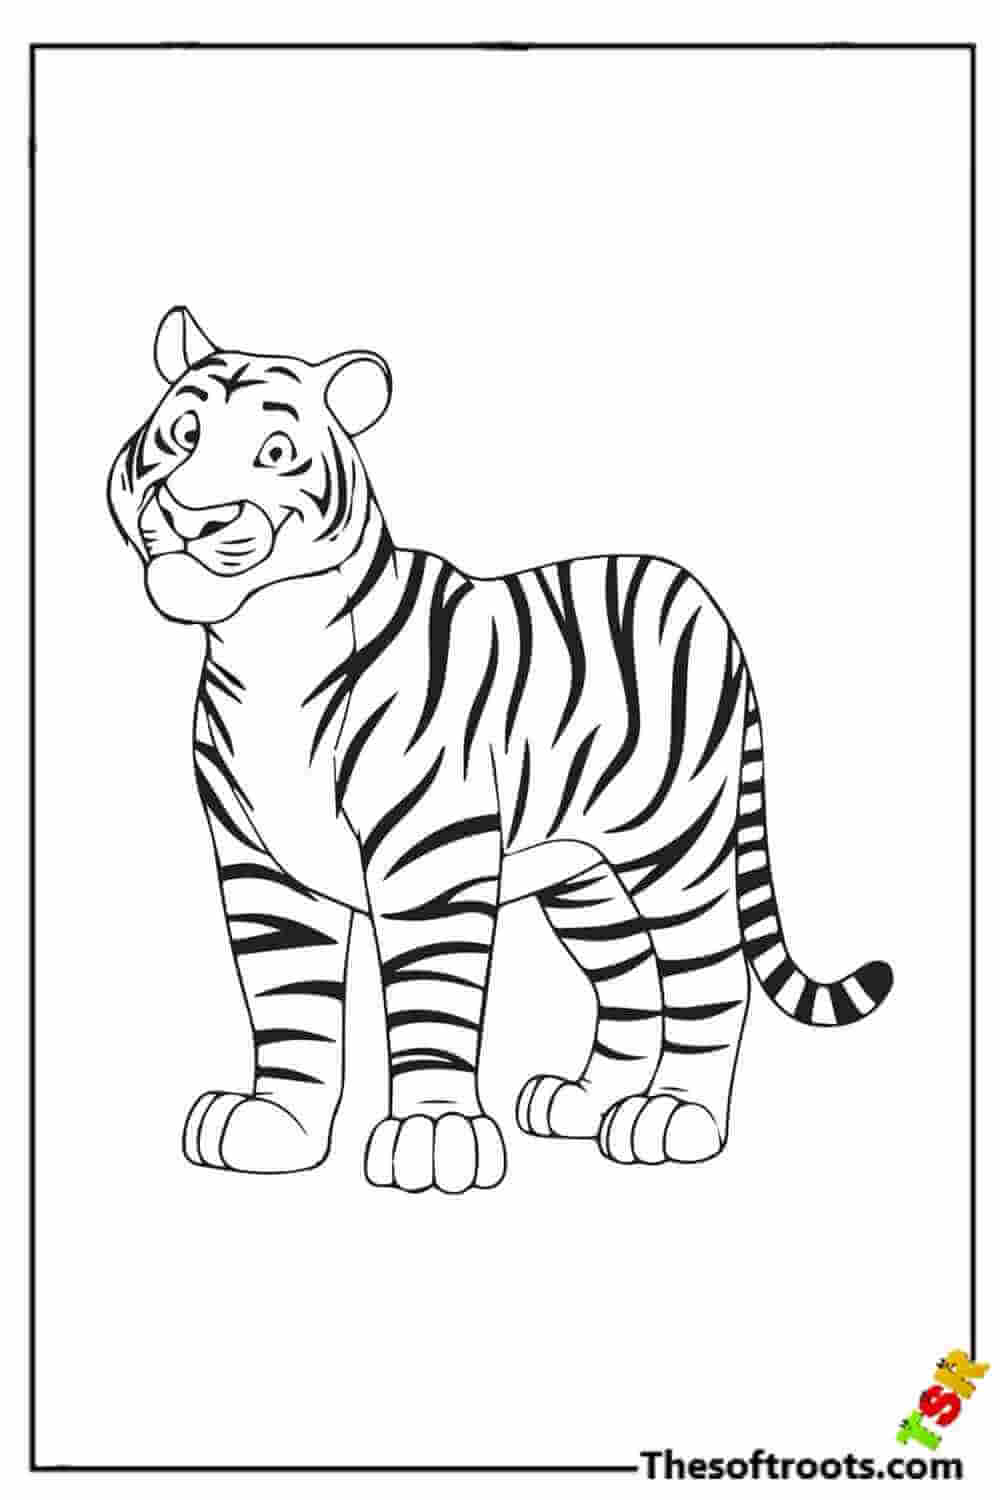 Simple Coloring Page for Kids - School Boy | Little boy drawing, Cartoon  coloring pages, Coloring books